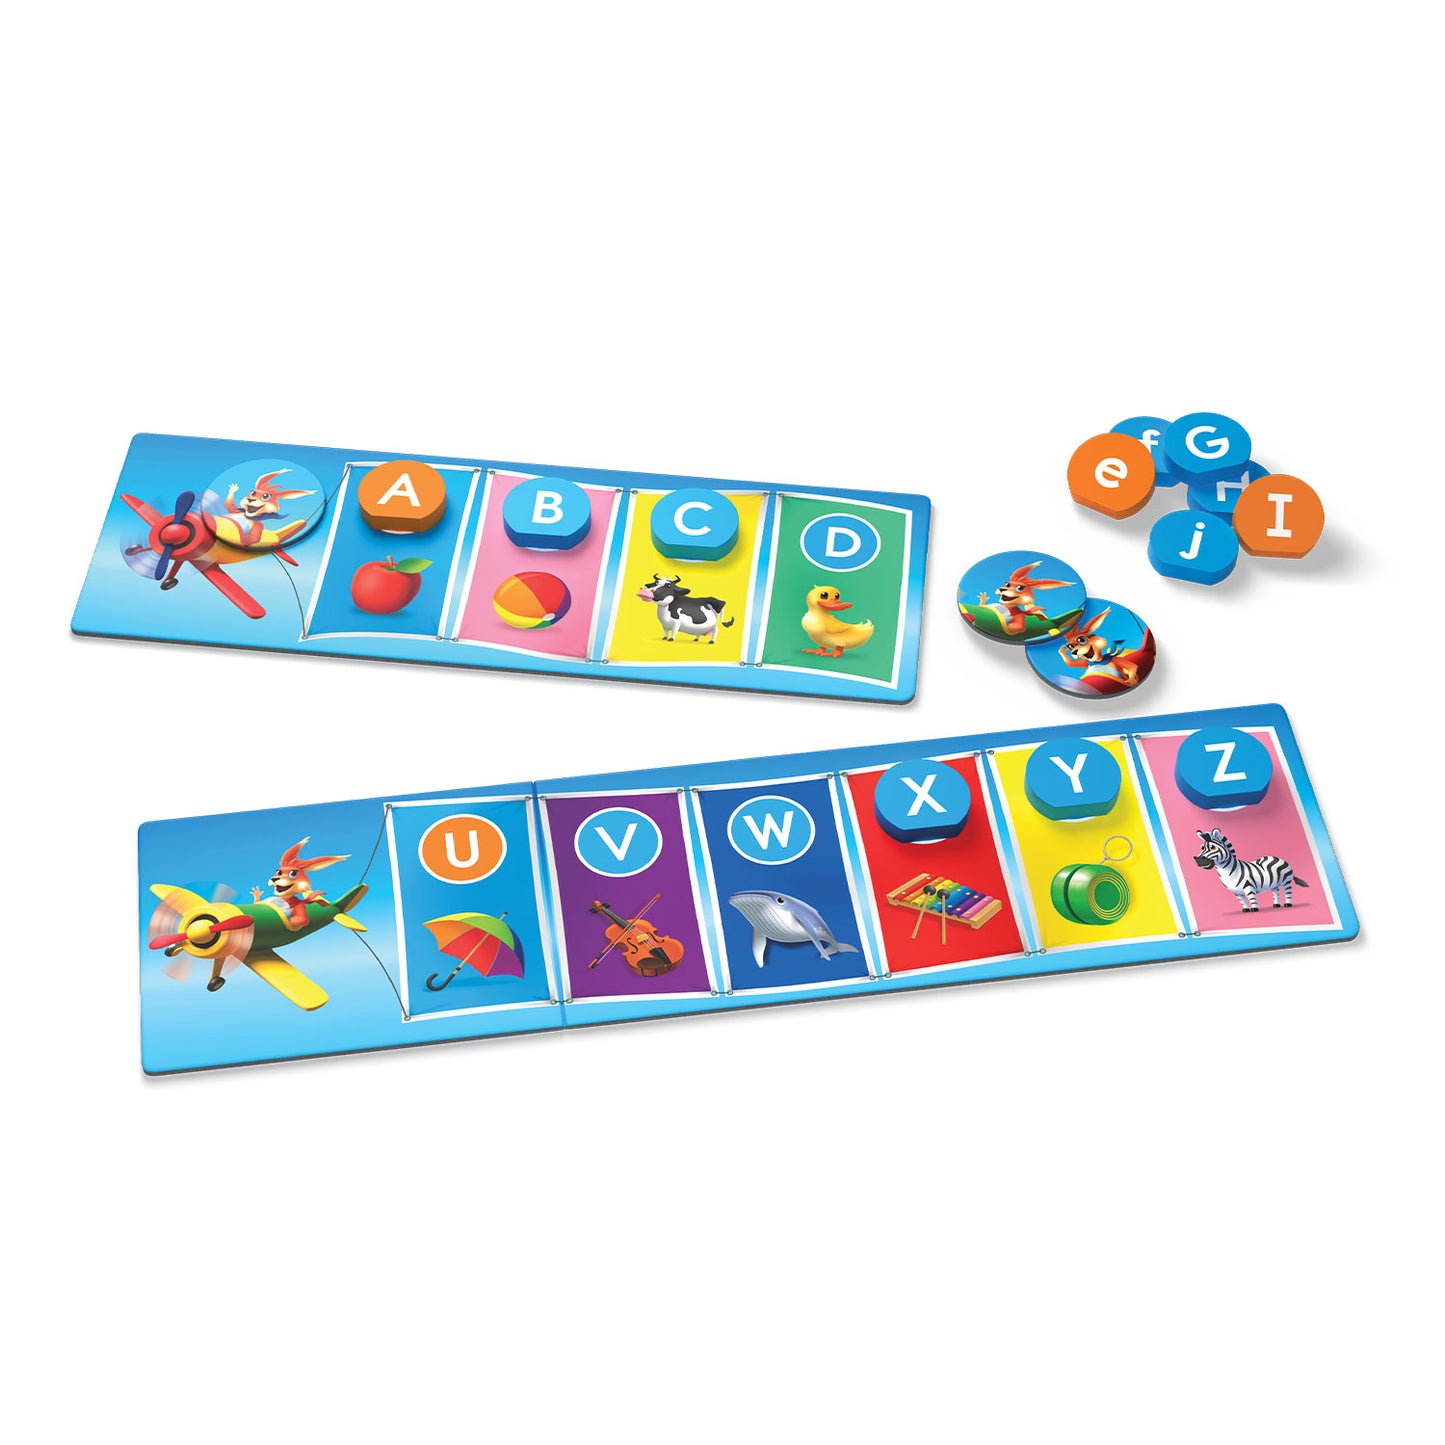 Rooby's ABCs by SimplyFun is a letter recognition game focusing on alphabet sequencing for ages 3 and up.